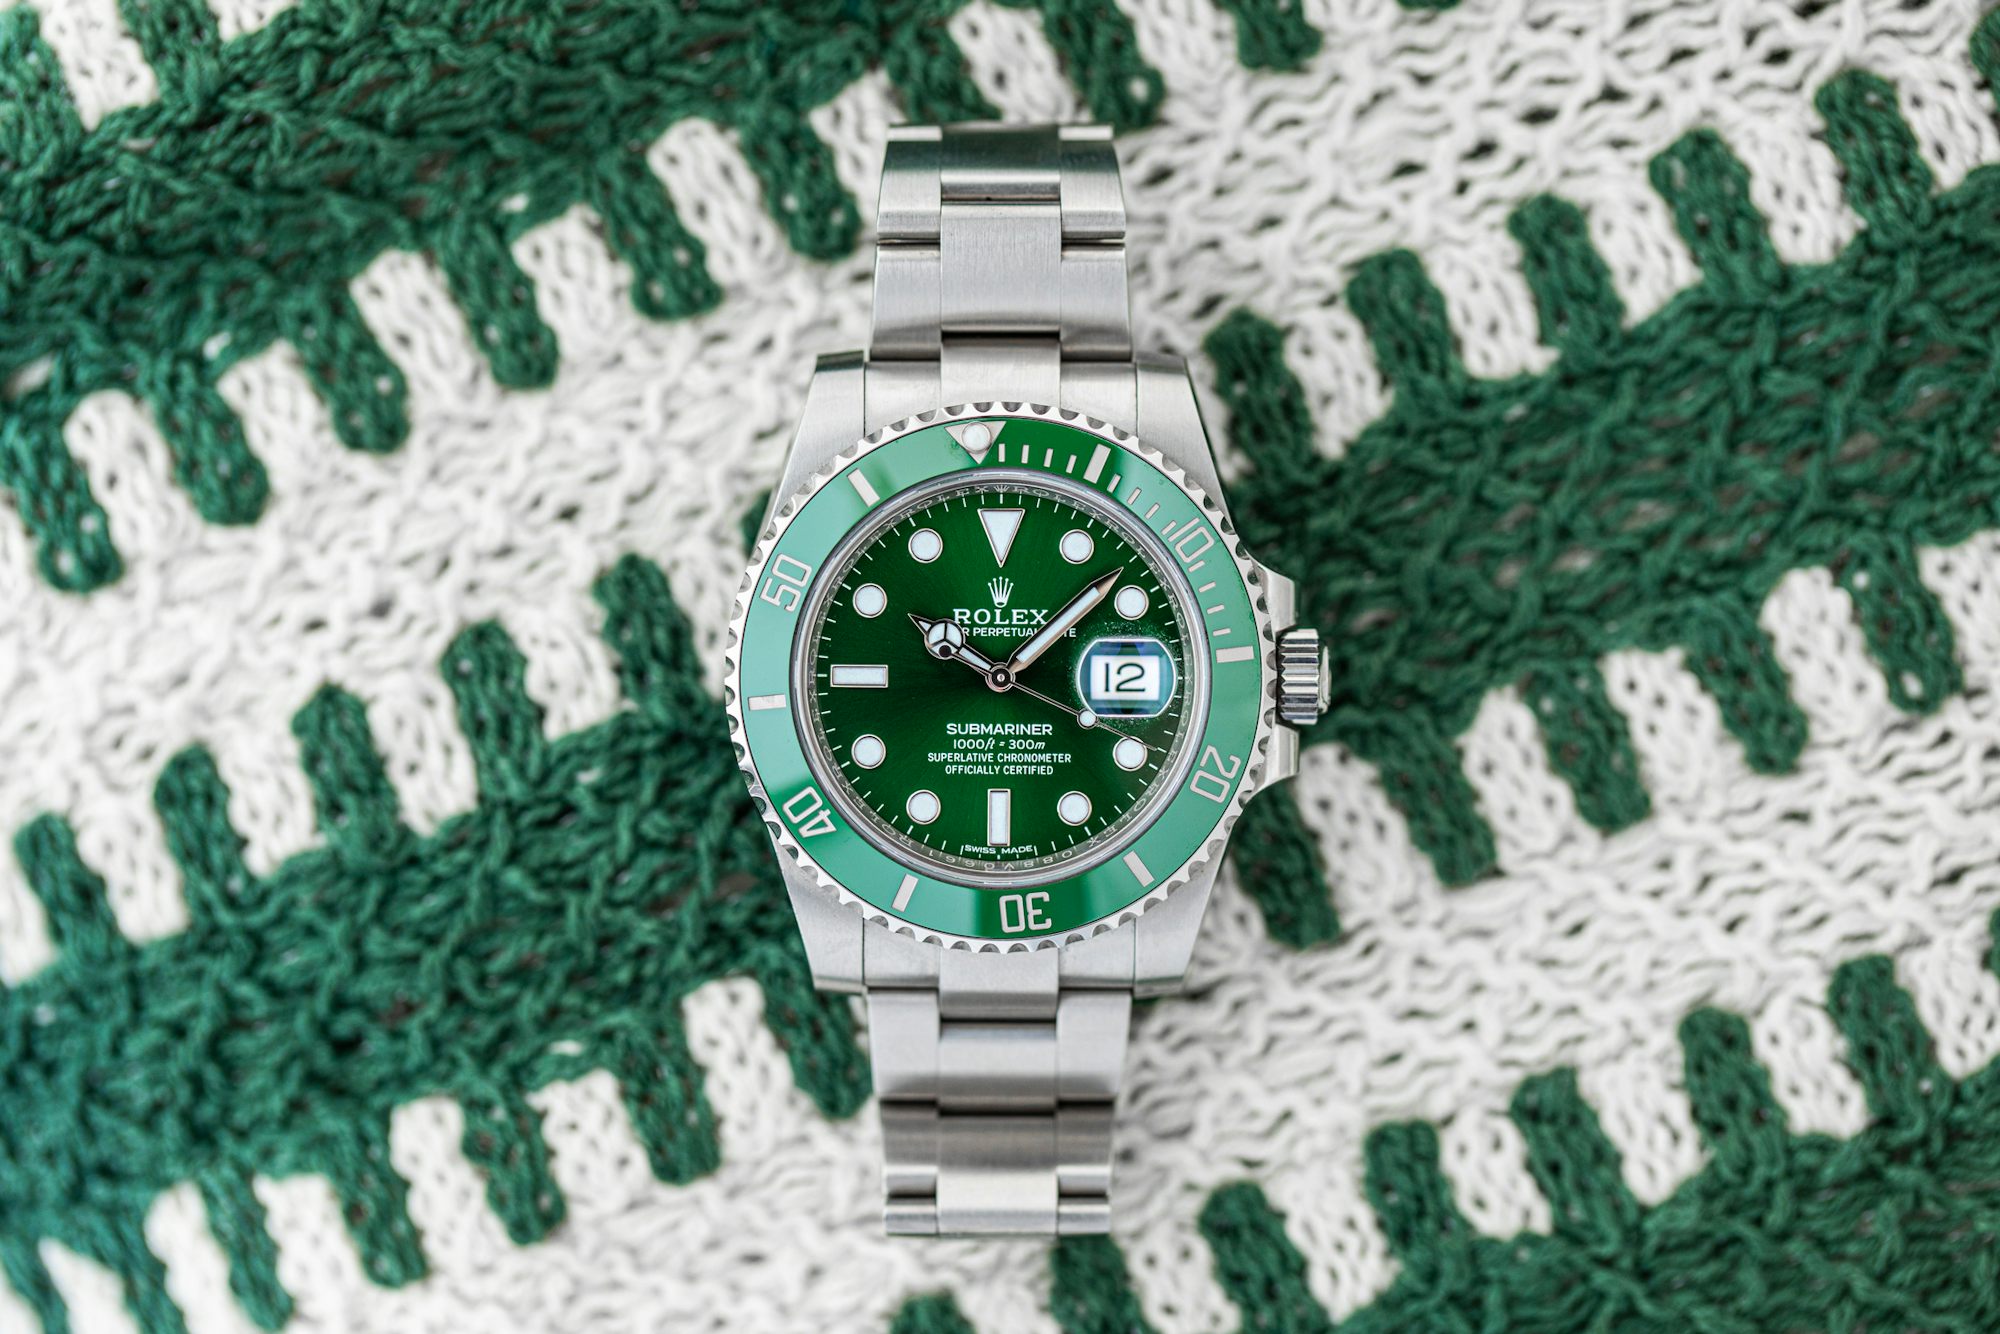 A green Rolex Submariner laid out on a knitted fabric